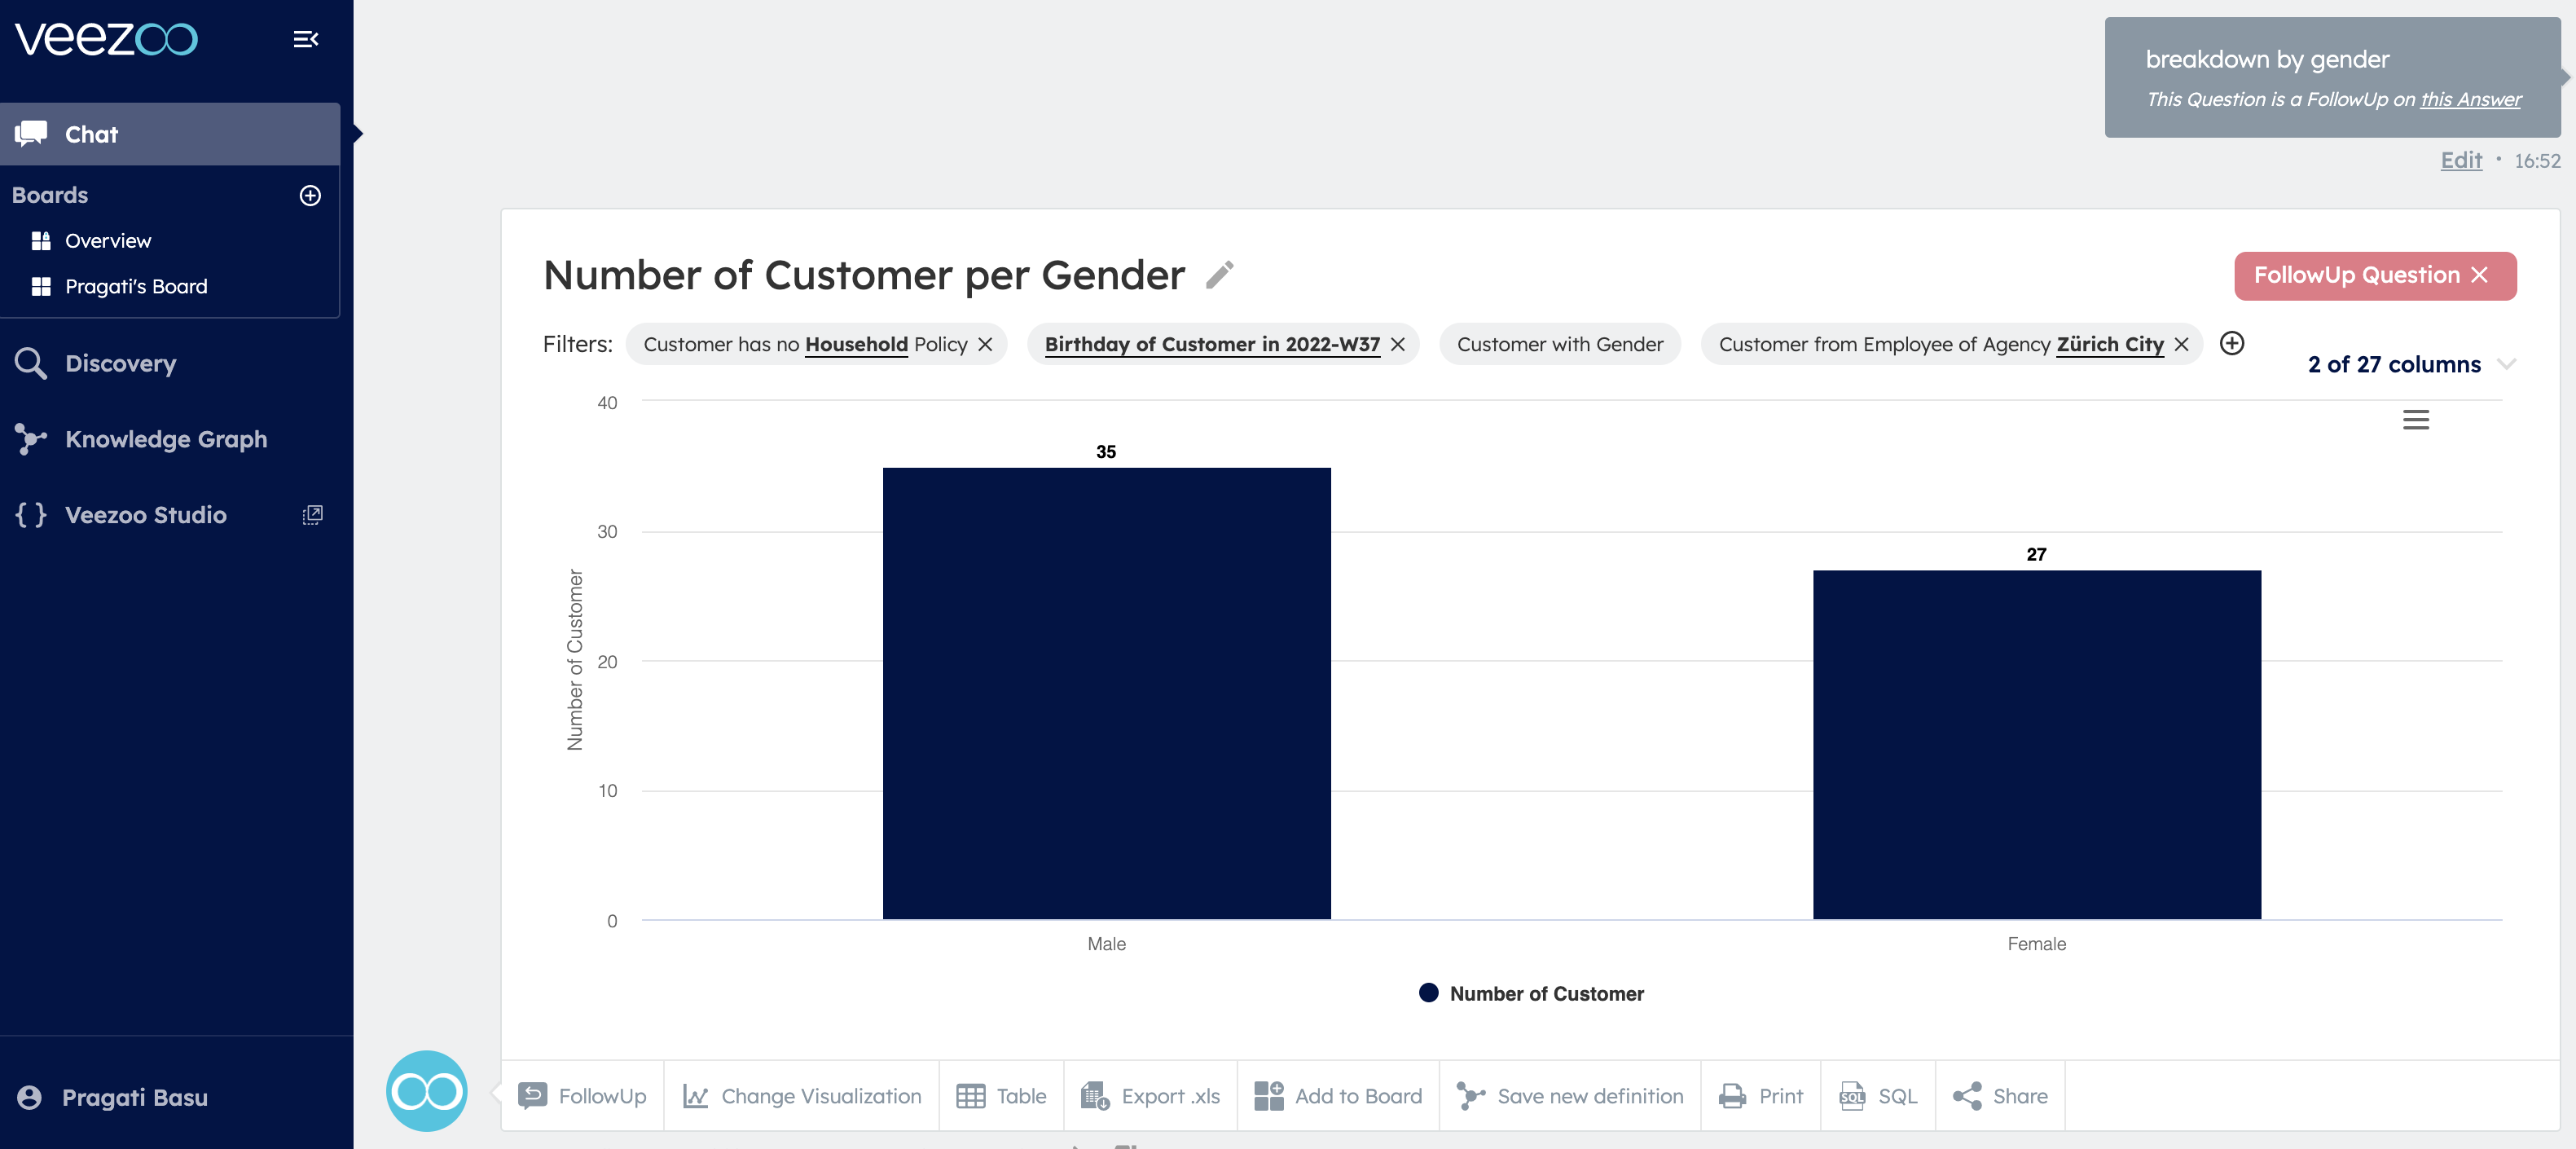 Follow up questions like Gender Split aremade easy with Veezoo